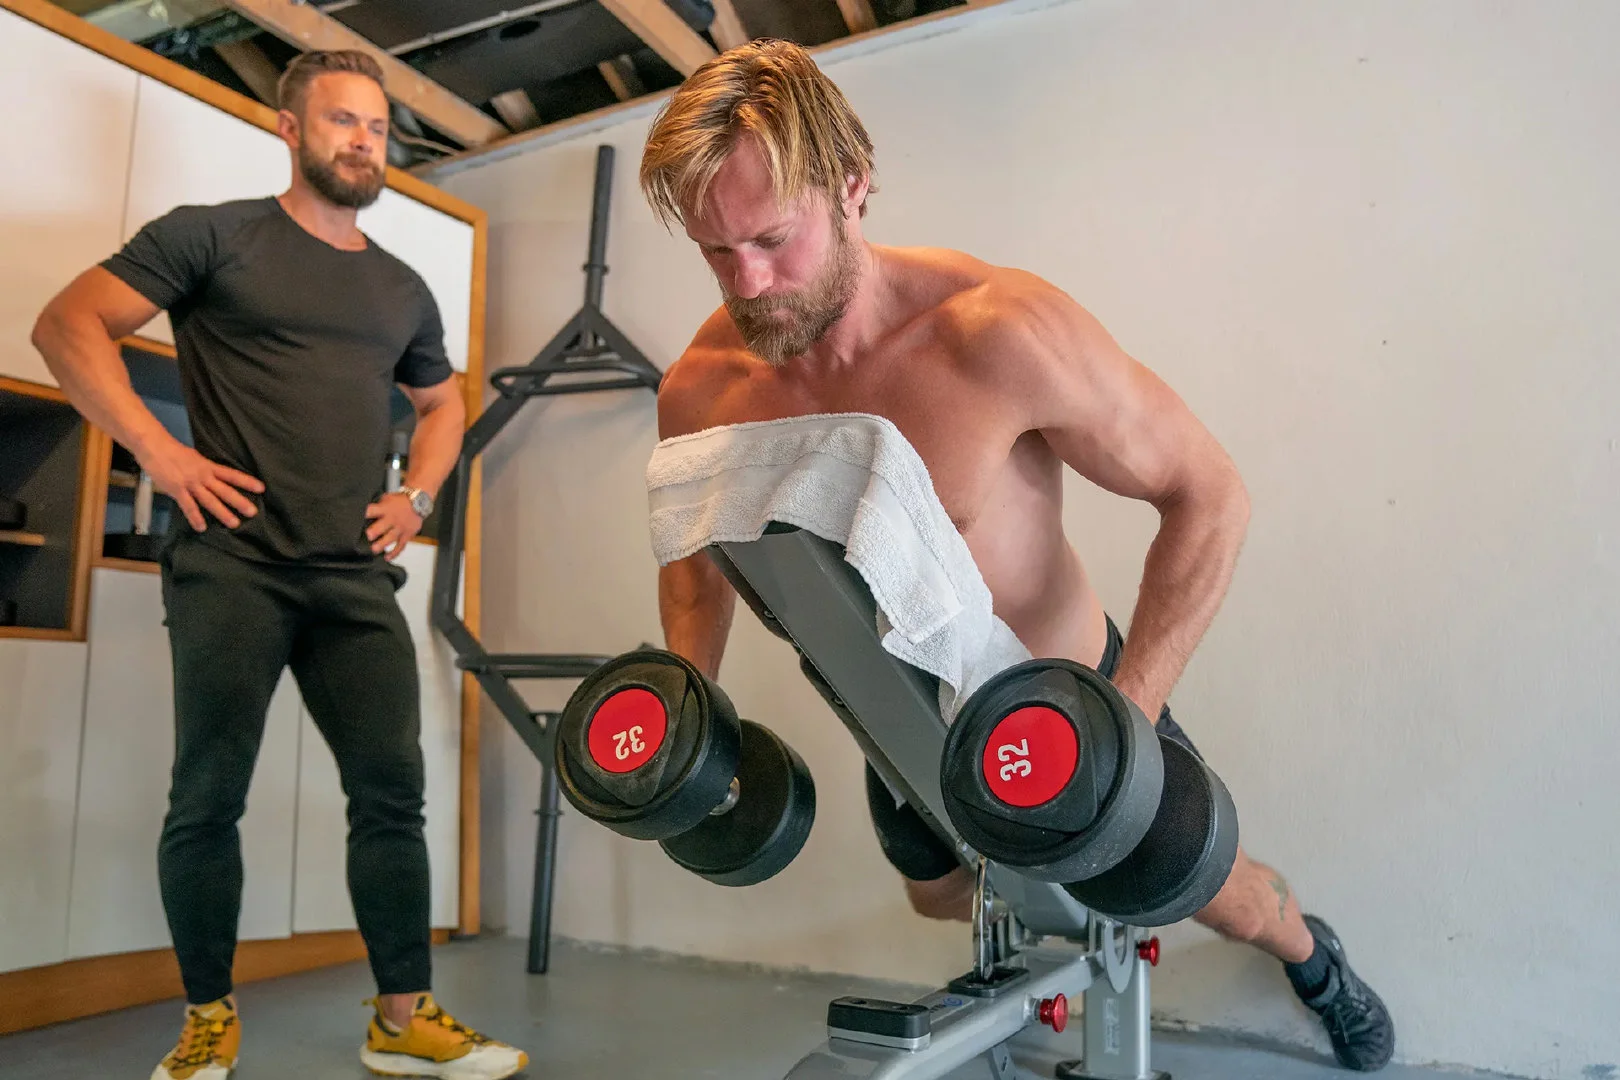 Behind-the-scenes photos of Alexander Skarsgård working out for the new film "The Northman"